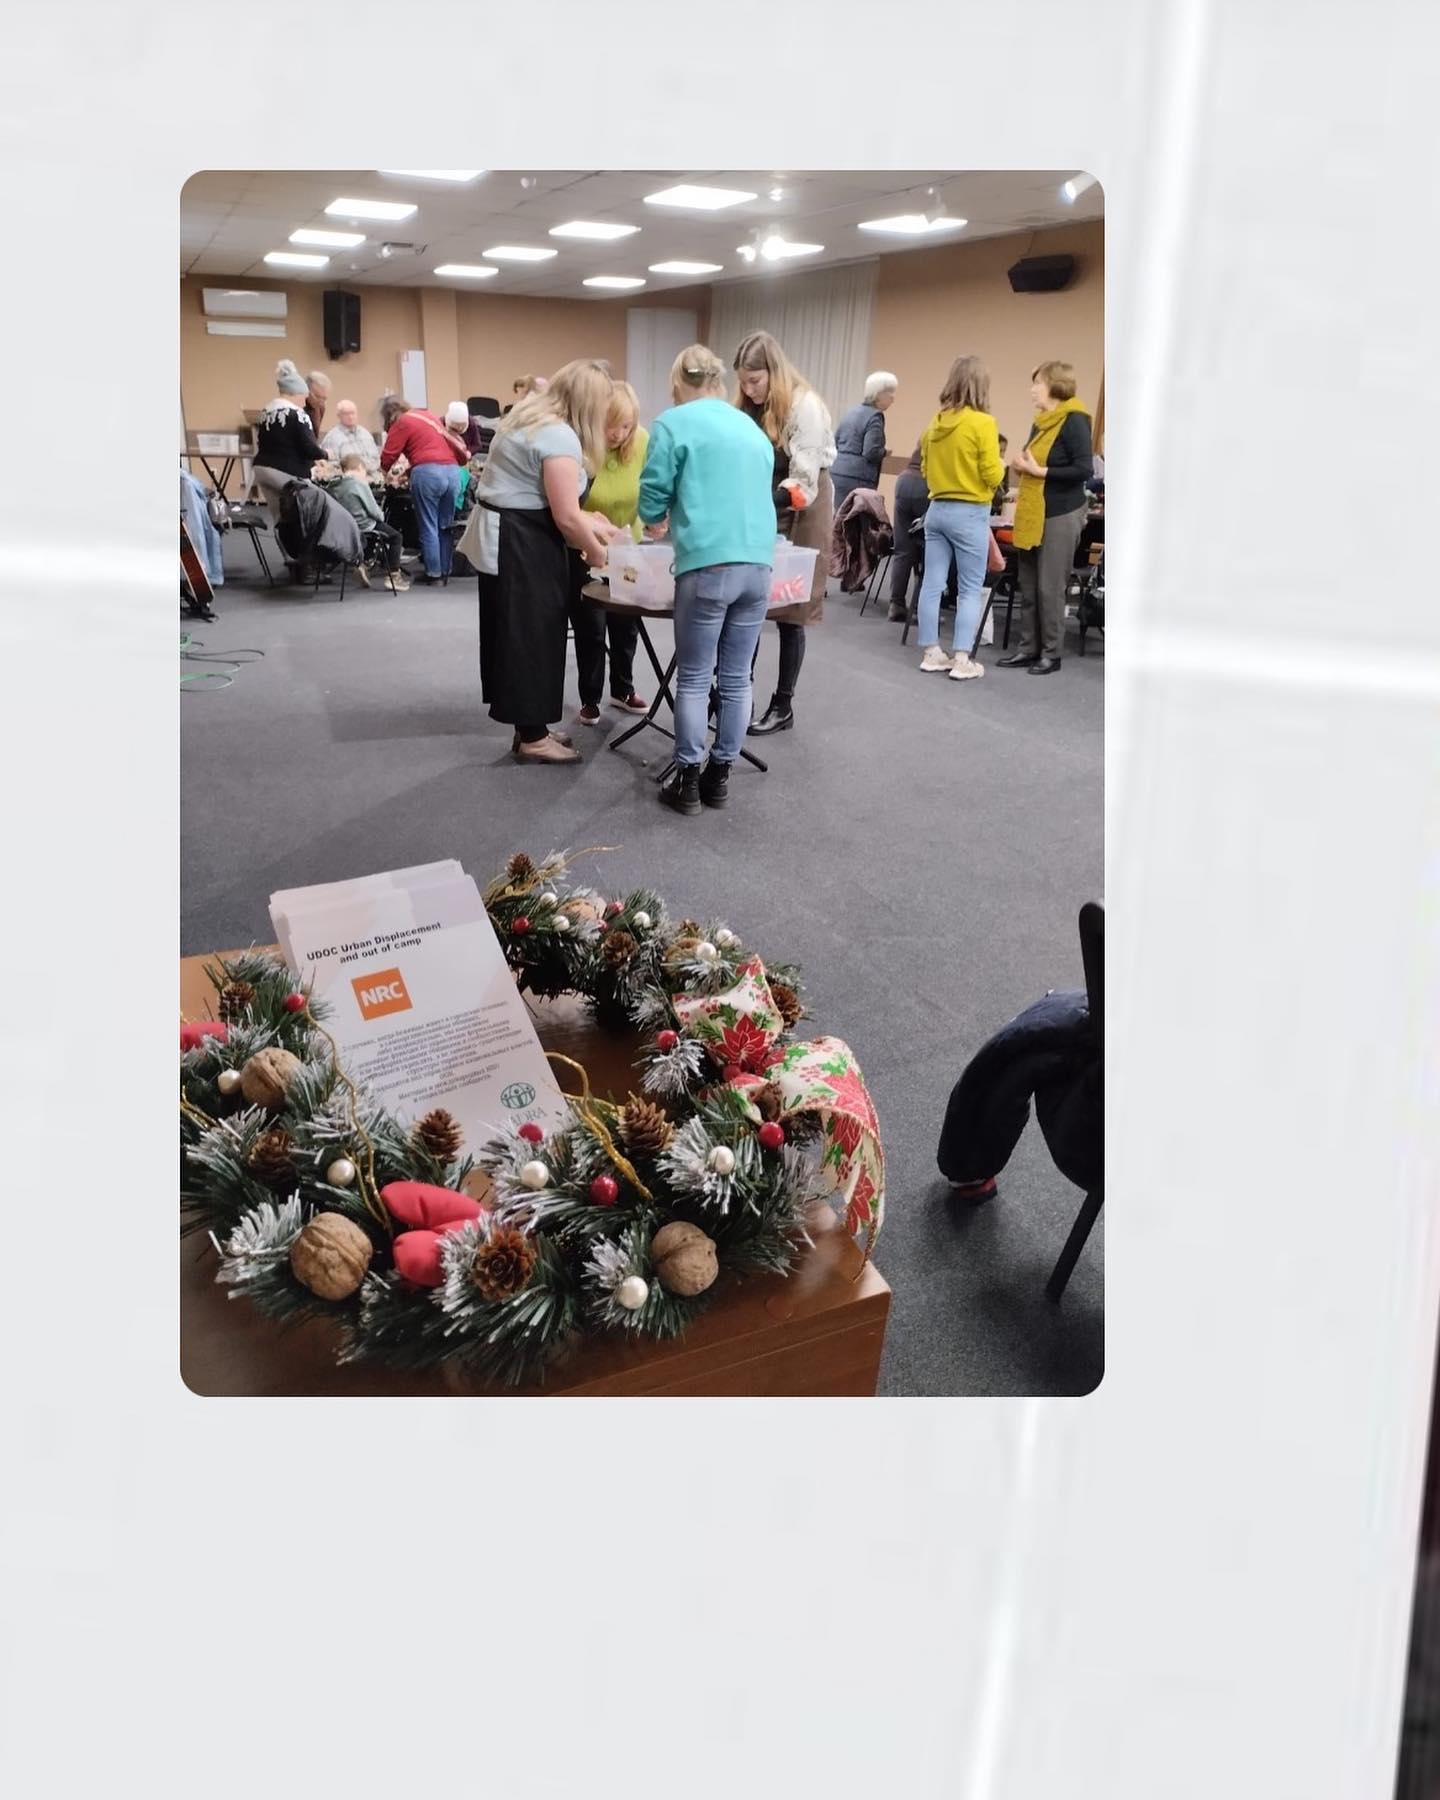 In December, ADRA Moldova organised a workshop meeting aimed at social inclusion and friendship with refugees from Ukraine. Using Art Therapy refugees created holiday decorations.